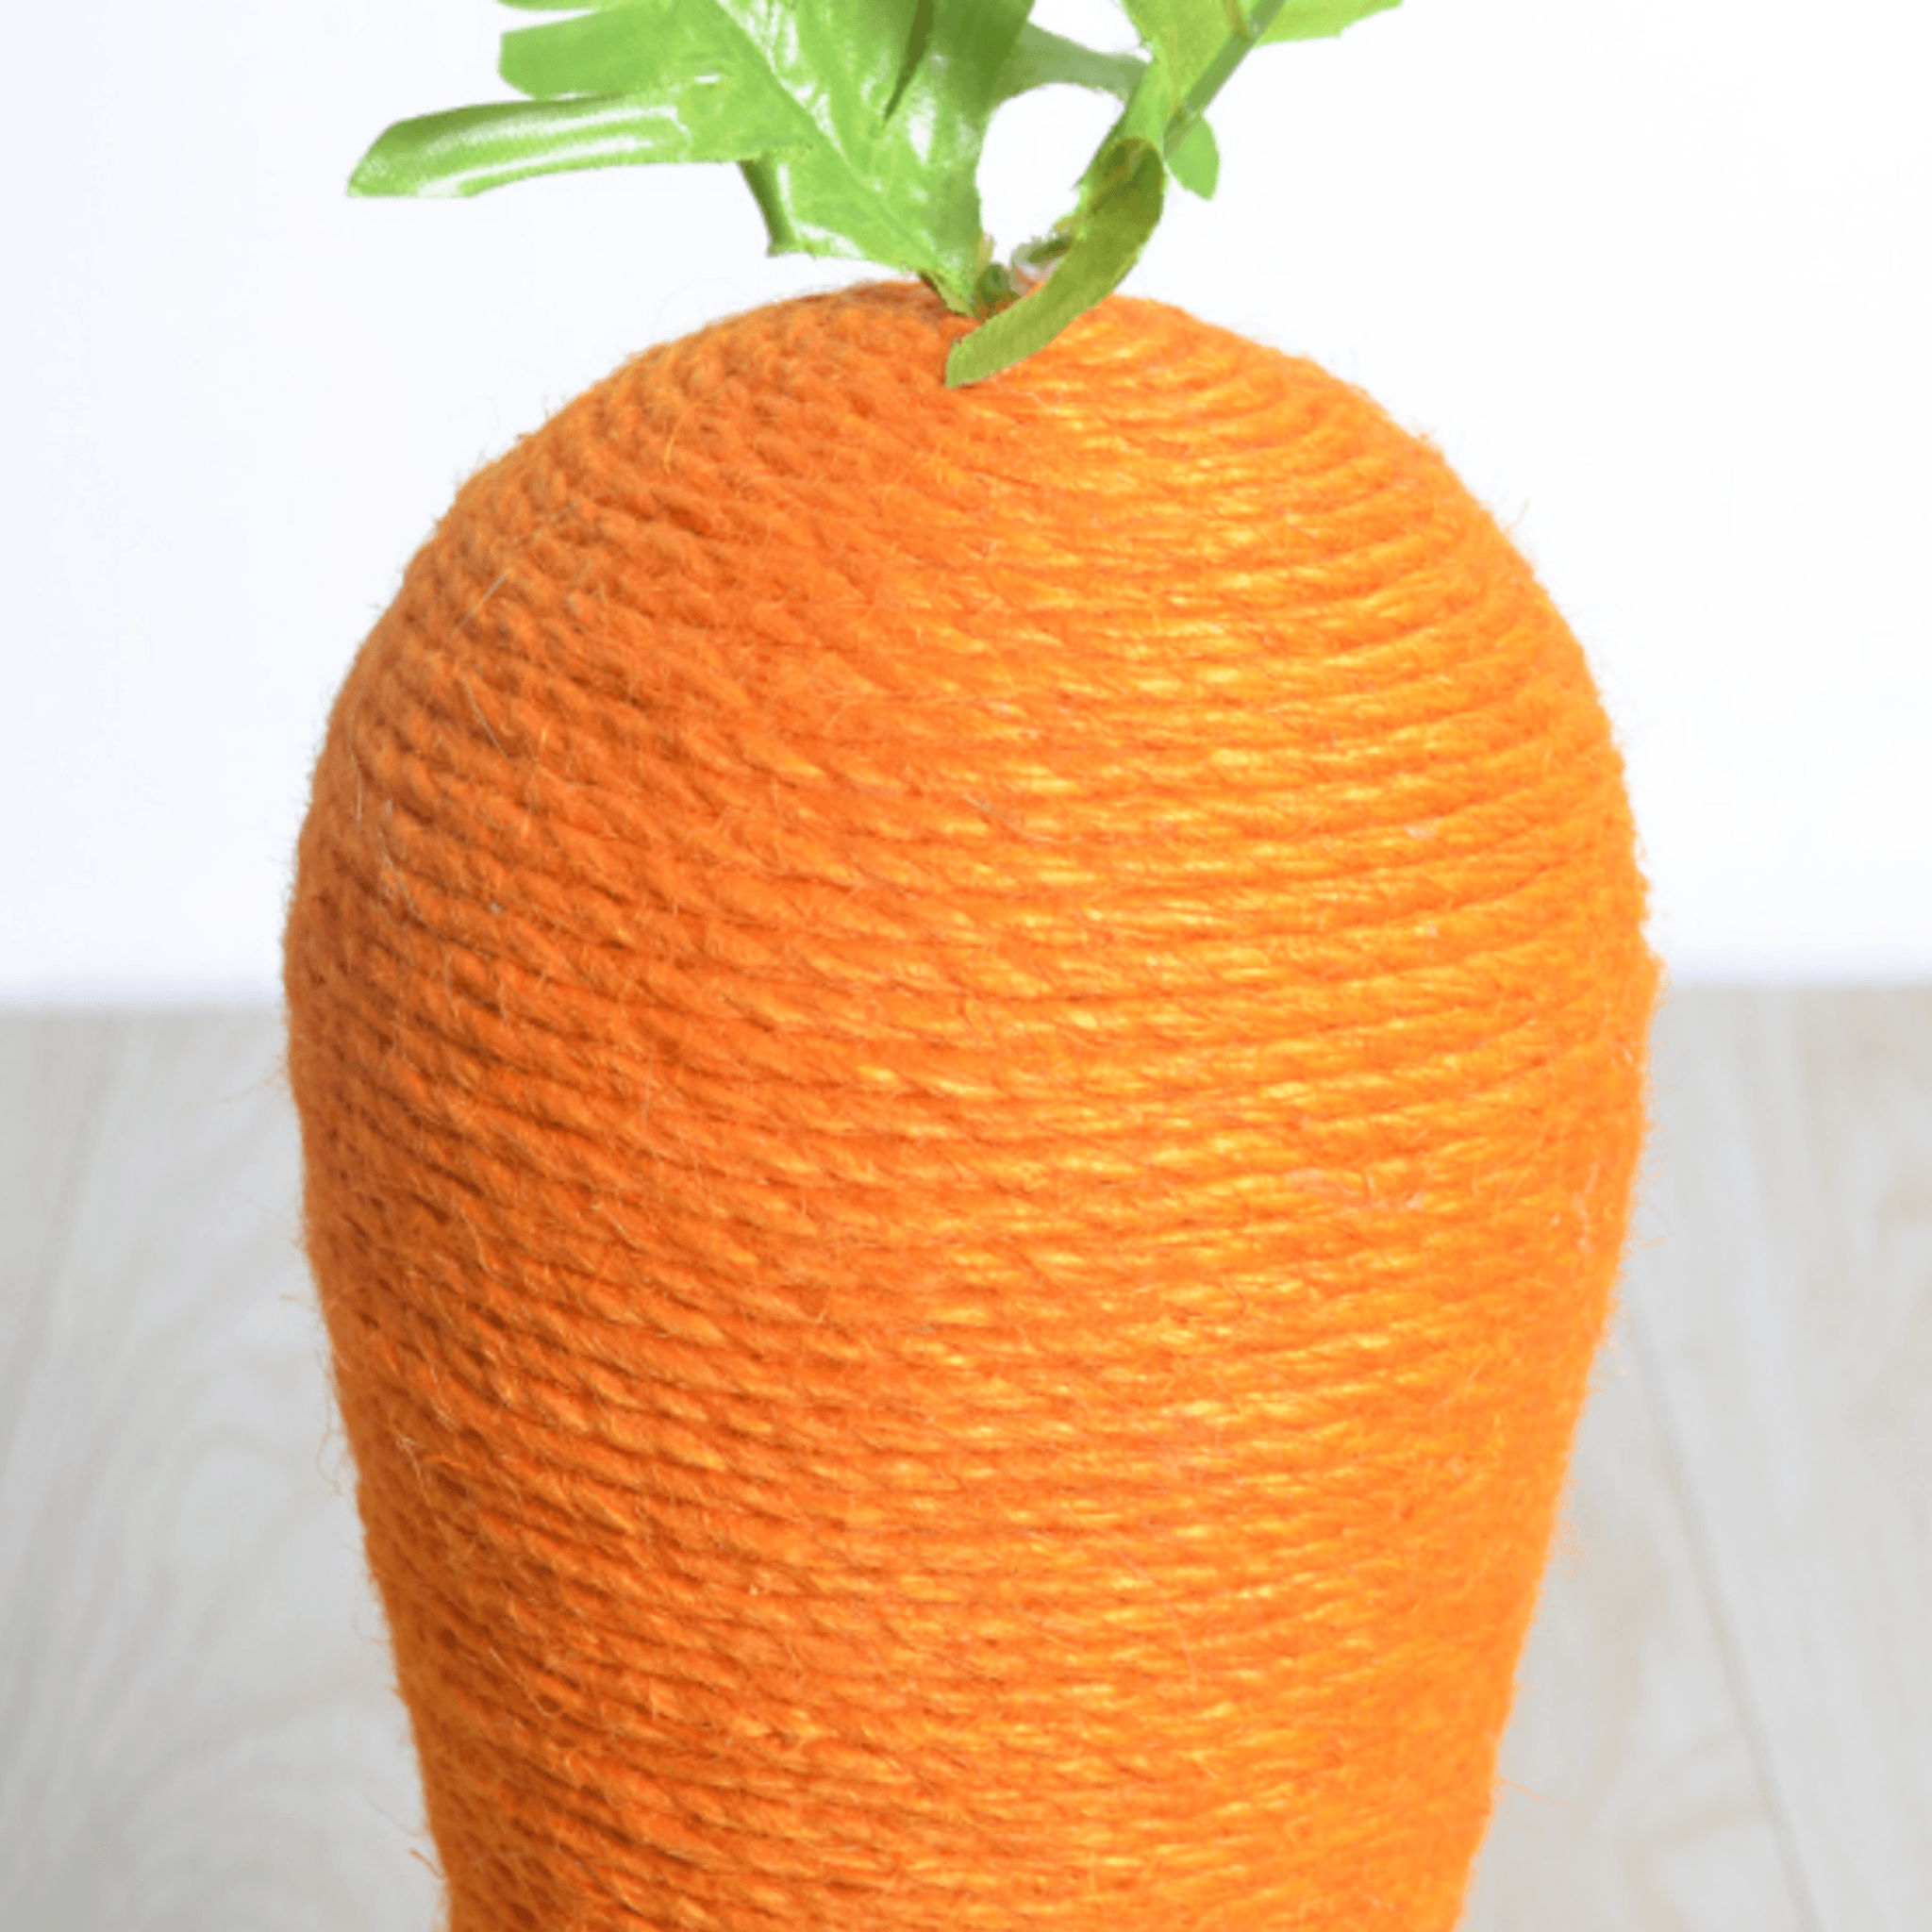 Giant Carrot Scratching Pole For Cats - Cat Scratchers - Higooga